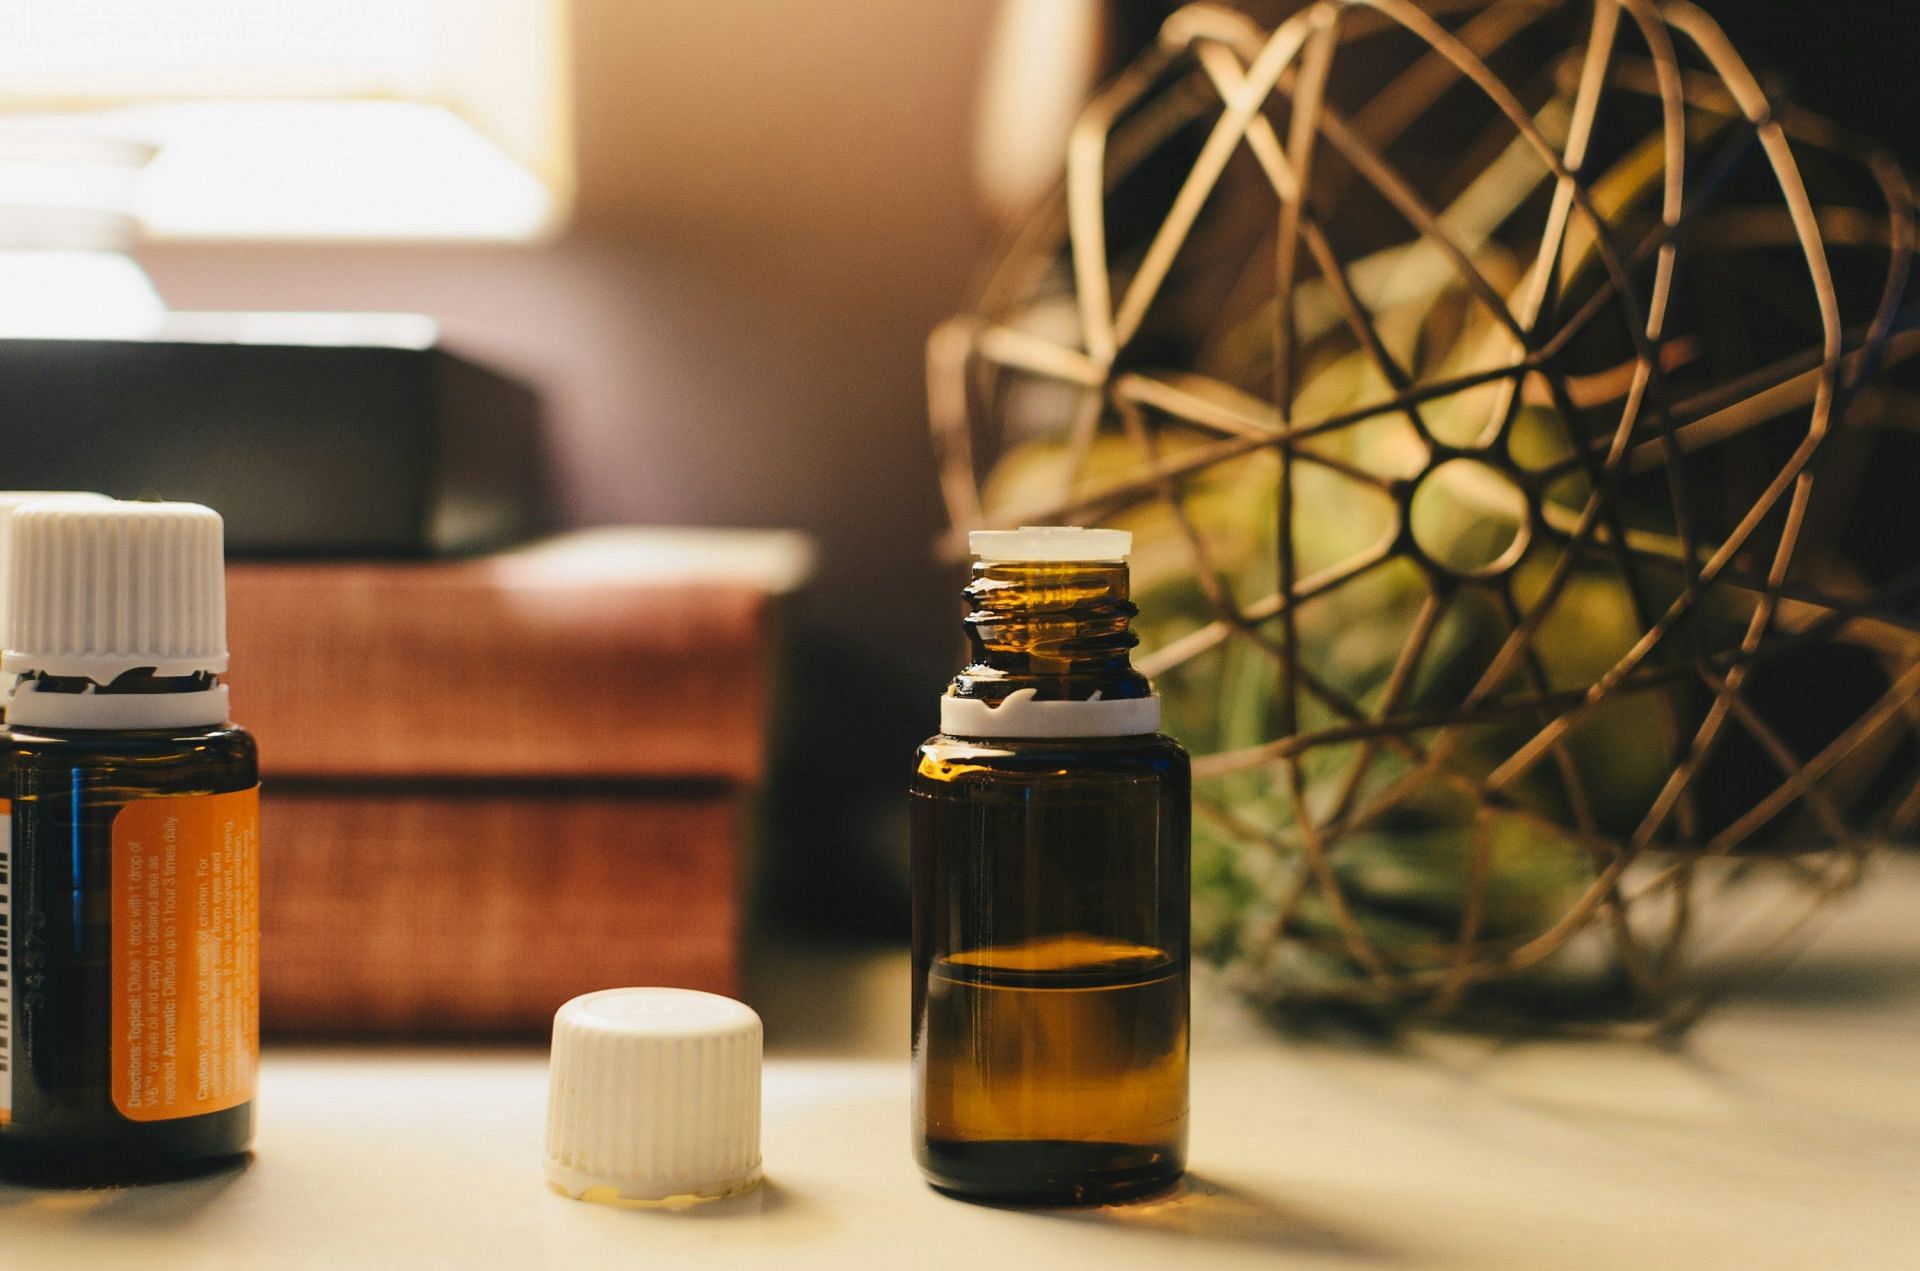 Homemade toner with Frankincense oil (Image by Kelly Sikkema/Unsplash)